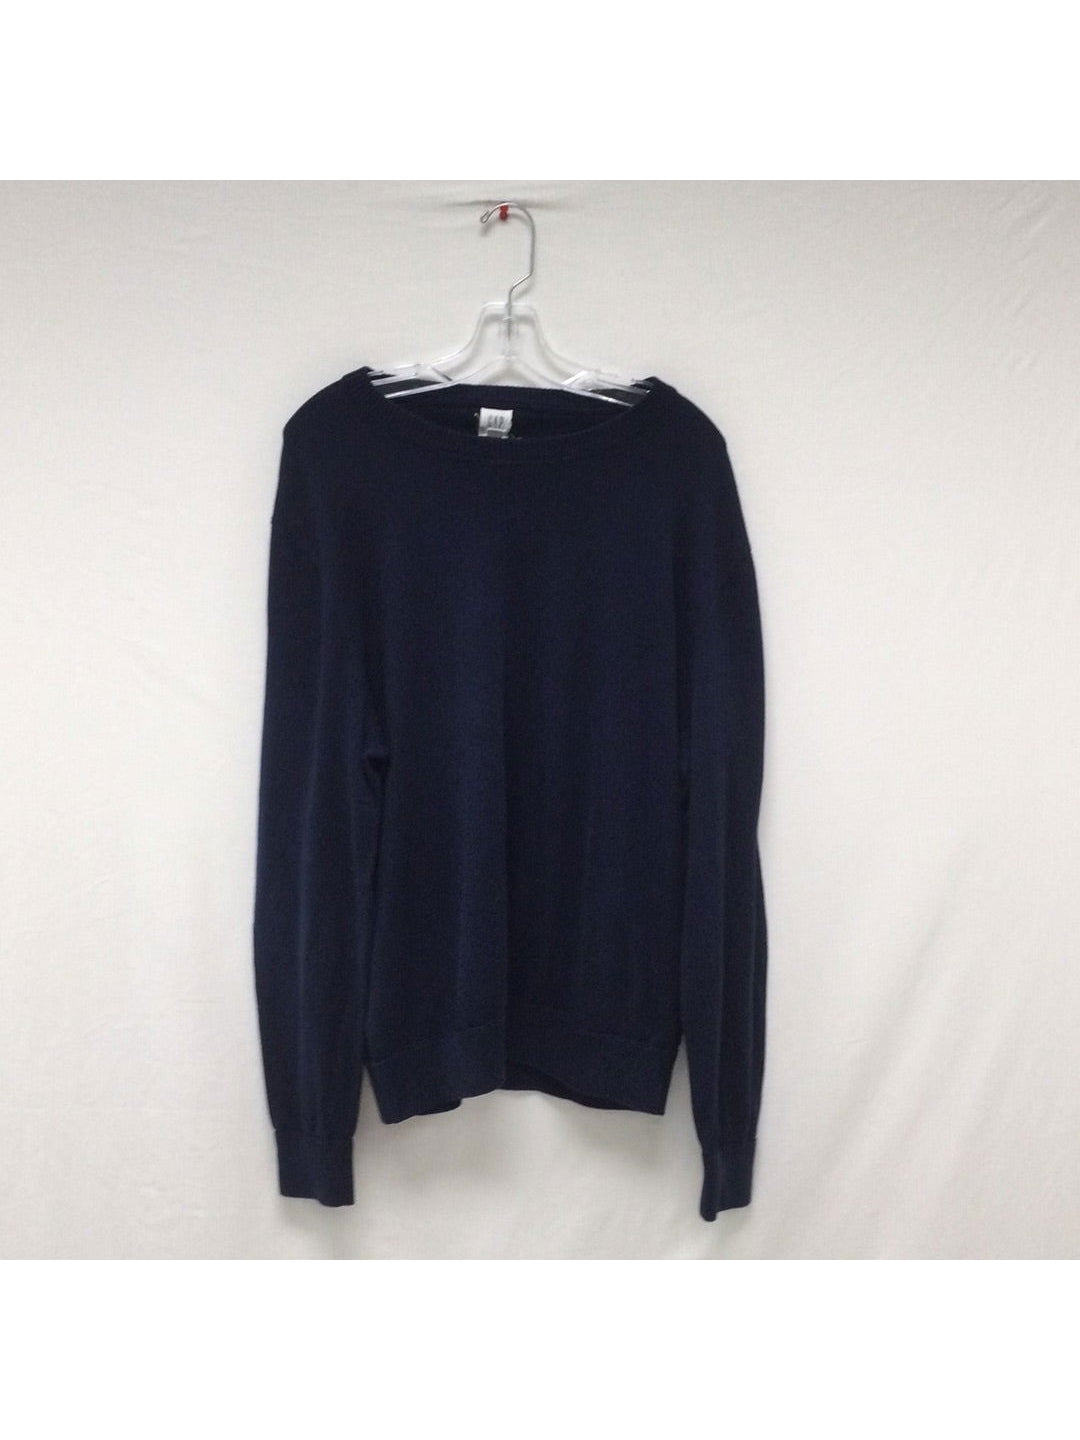 Gap Sweater Large Dark Blue Mens - The Kennedy Collective Thrift - 